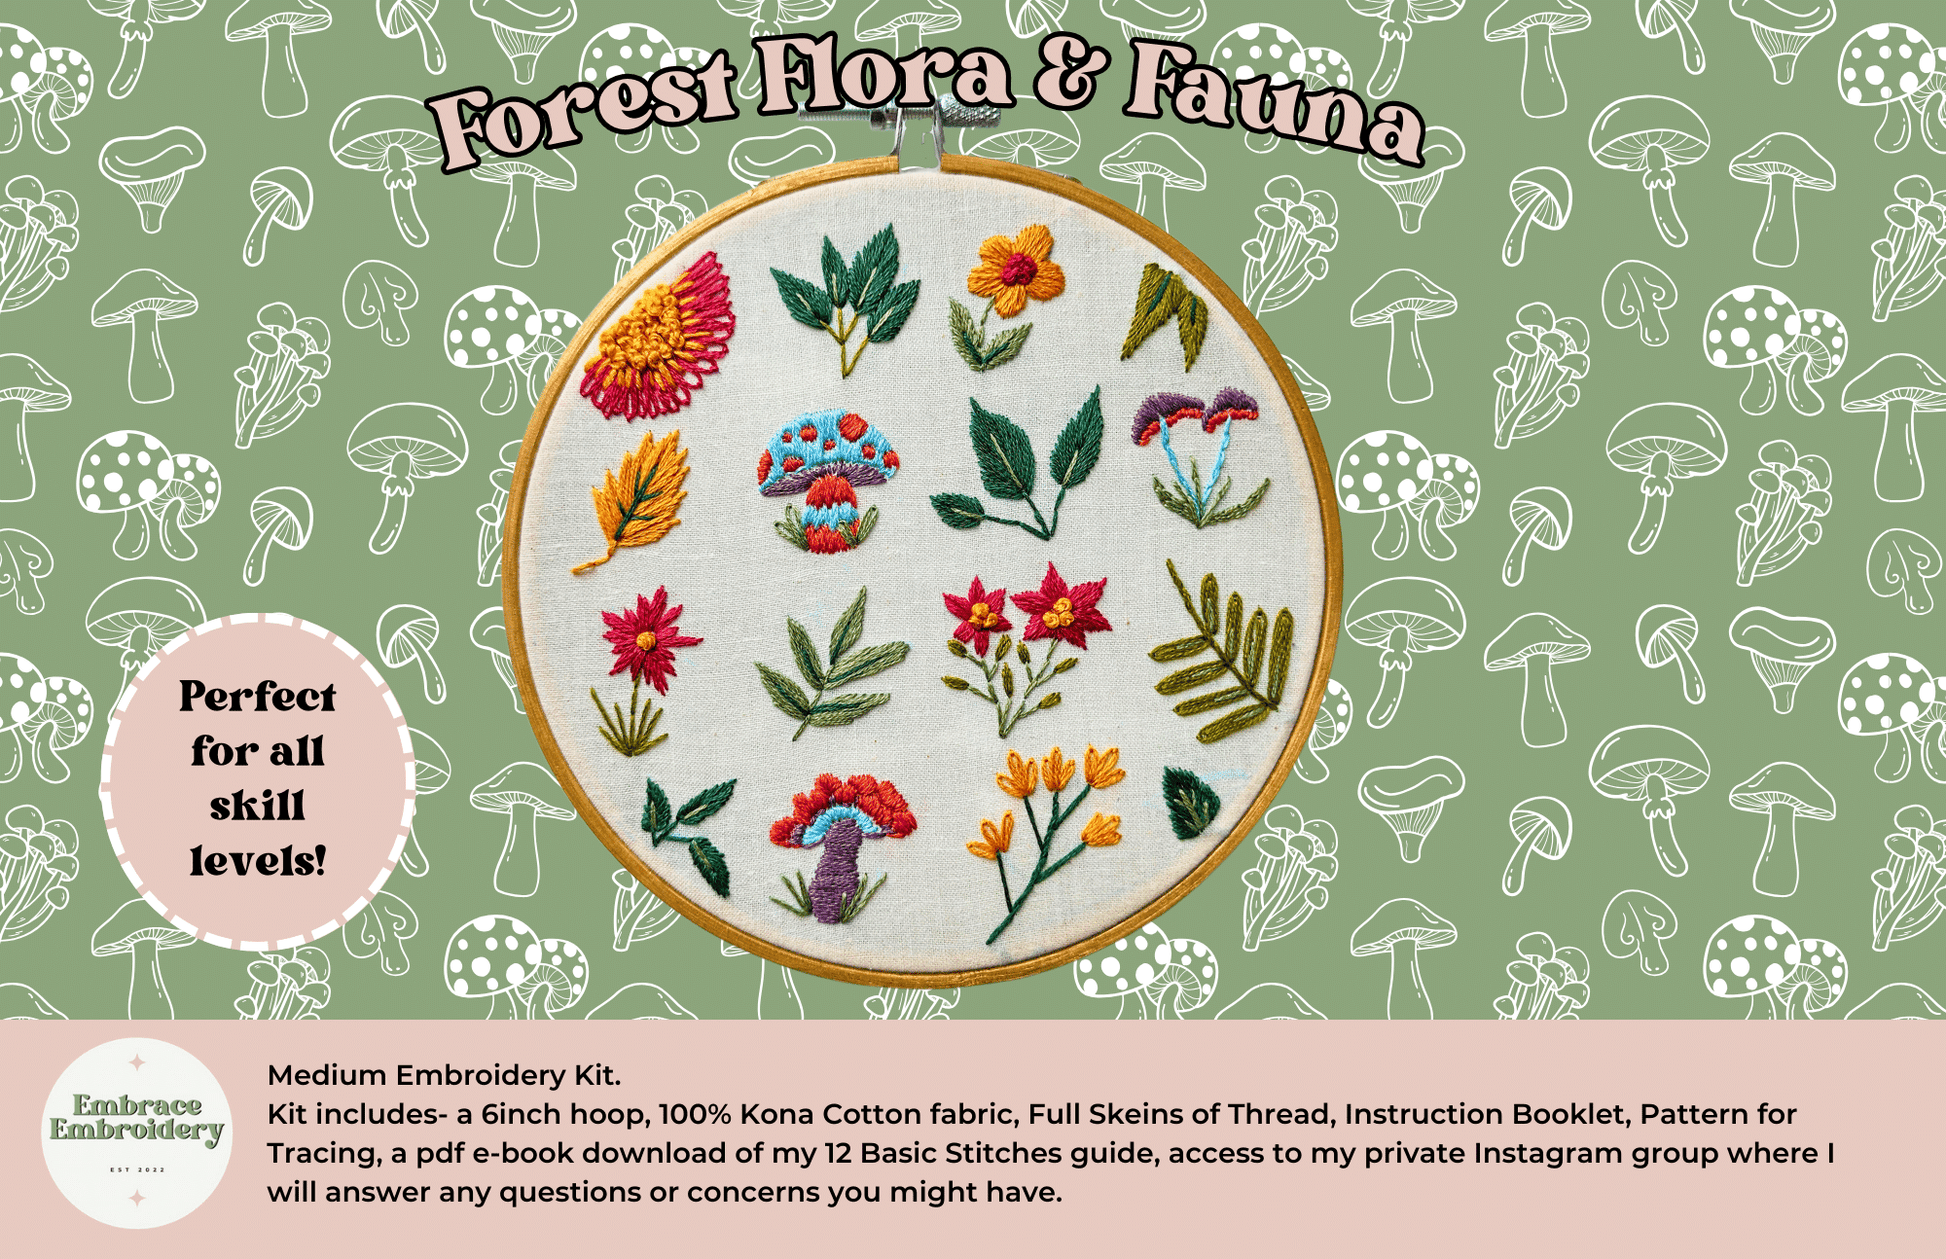 Embrace Embroidery Embroidery Kit Forest Flora & Fauna - Medium Embroidery Kit